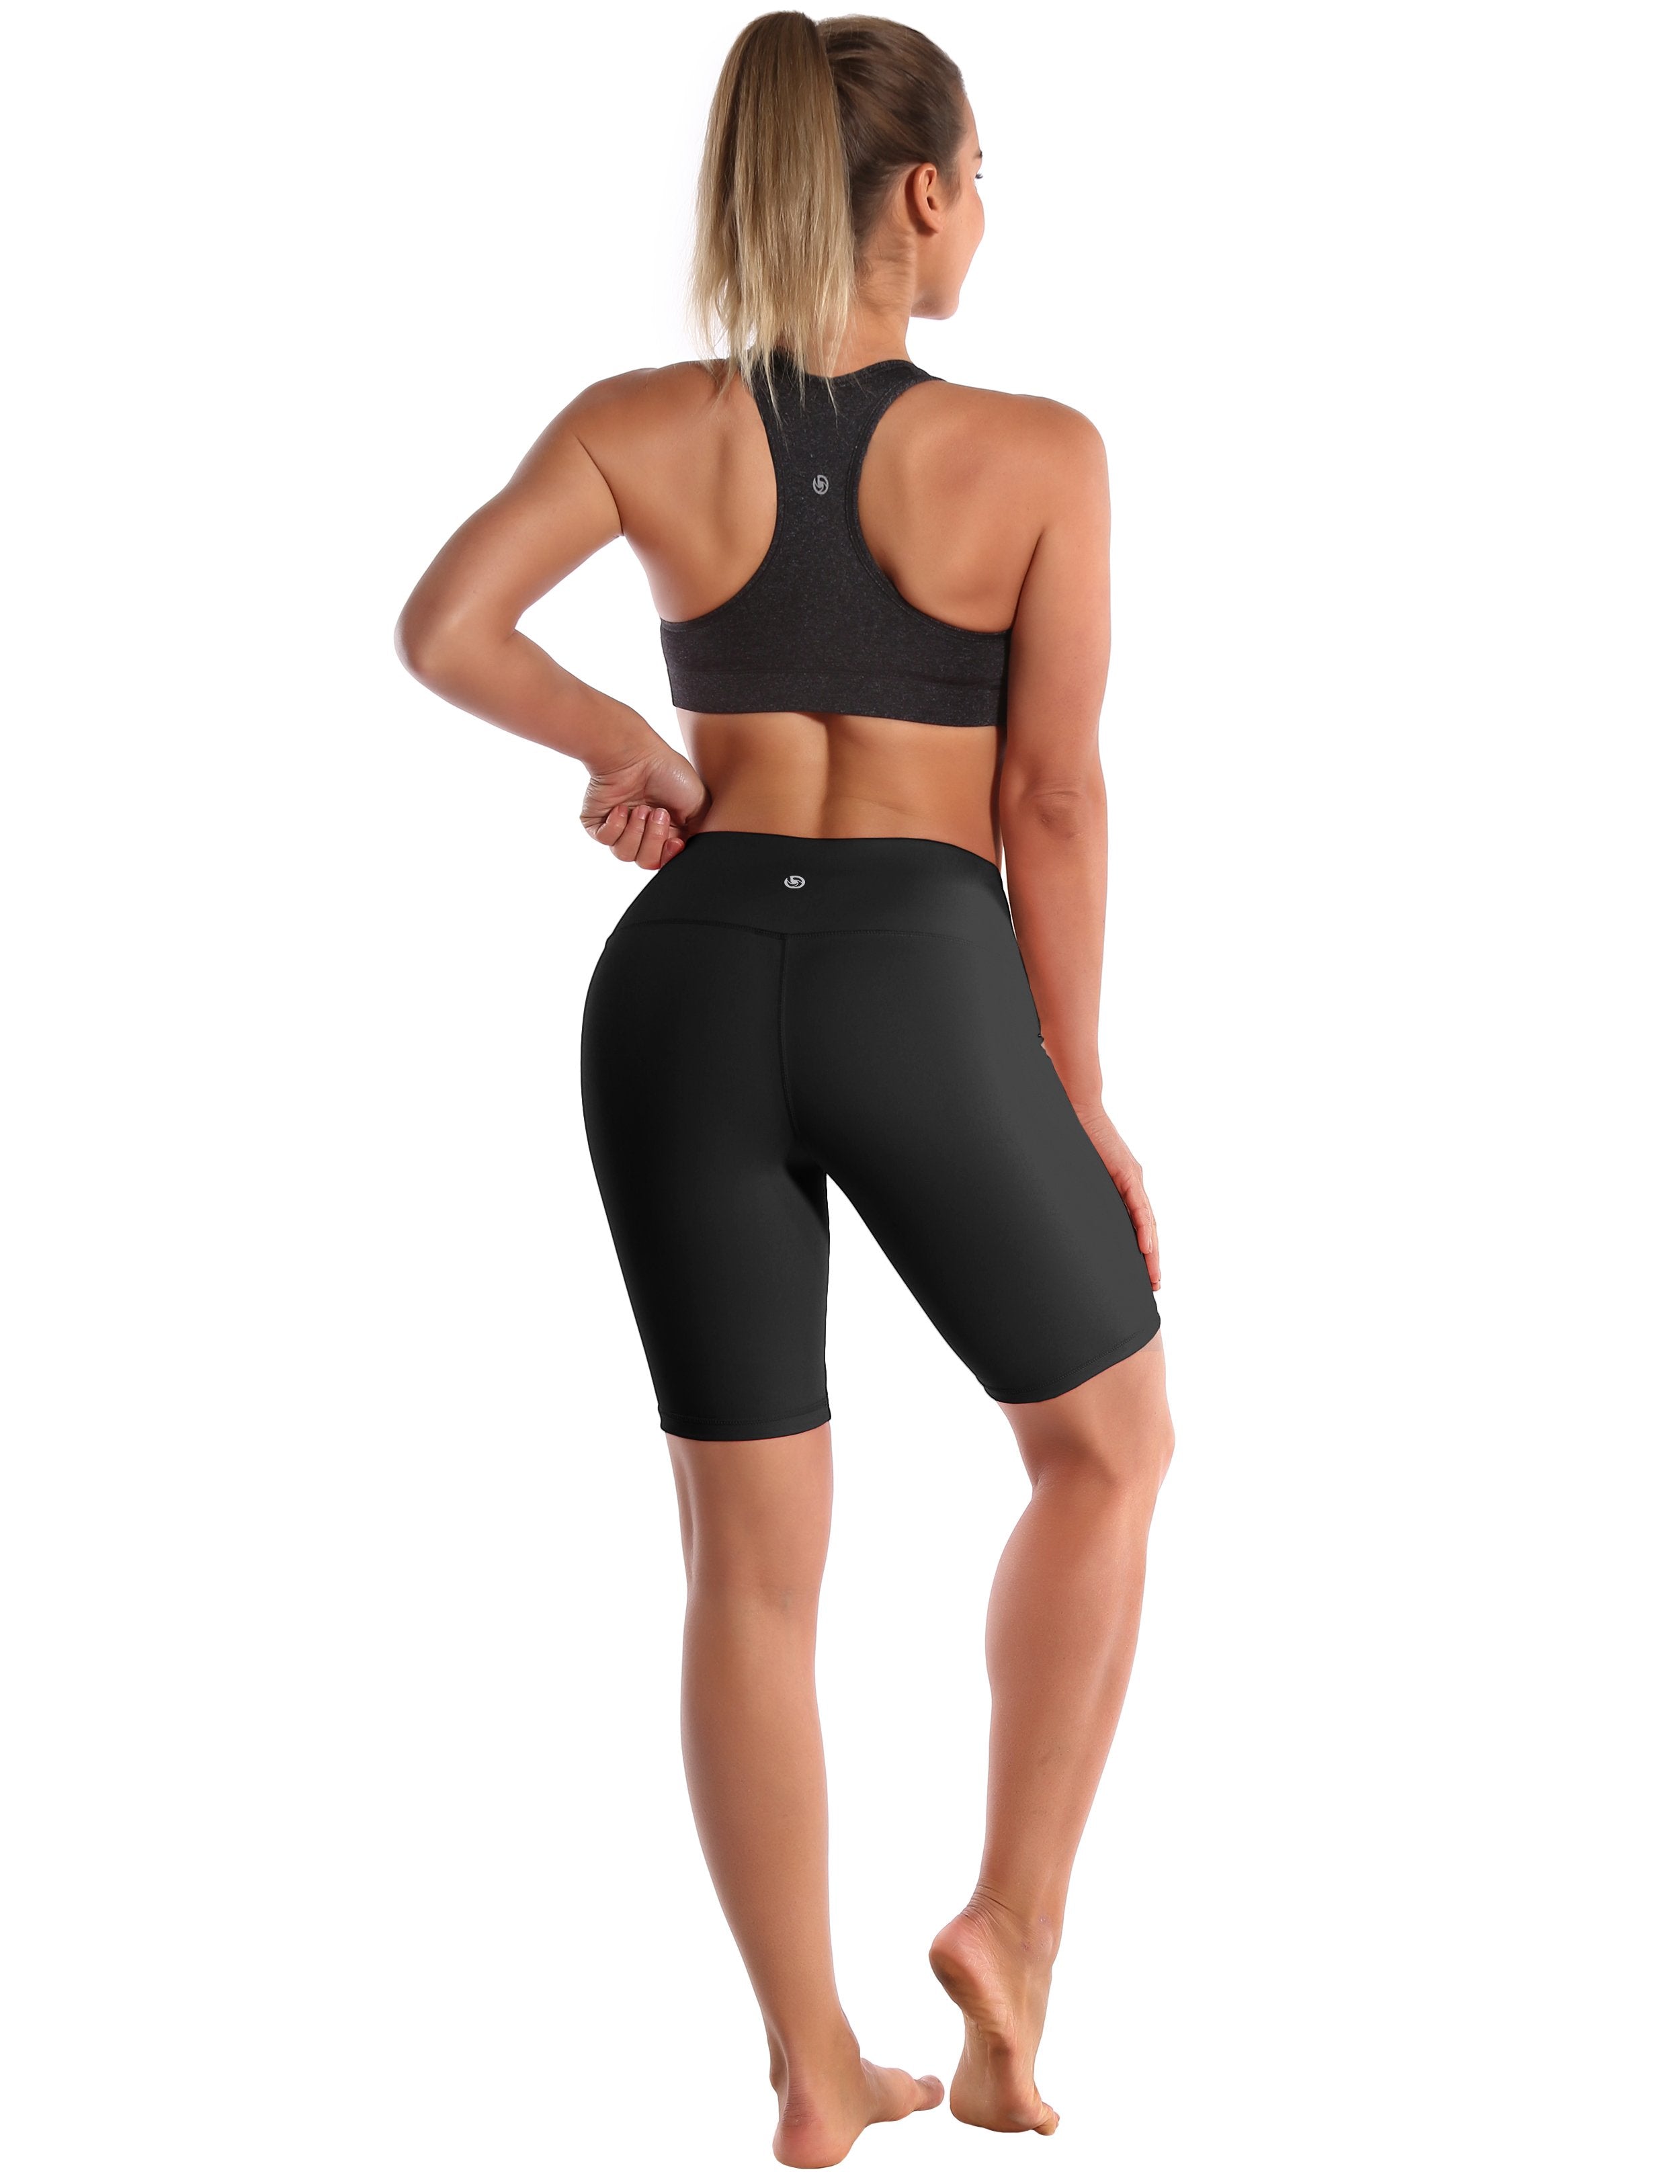 8" High Waist Plus Size Shorts black Sleek, soft, smooth and totally comfortable: our newest style is here. Softest-ever fabric High elasticity High density 4-way stretch Fabric doesn't attract lint easily No see-through Moisture-wicking Machine wash 75% Nylon, 25% Spandex